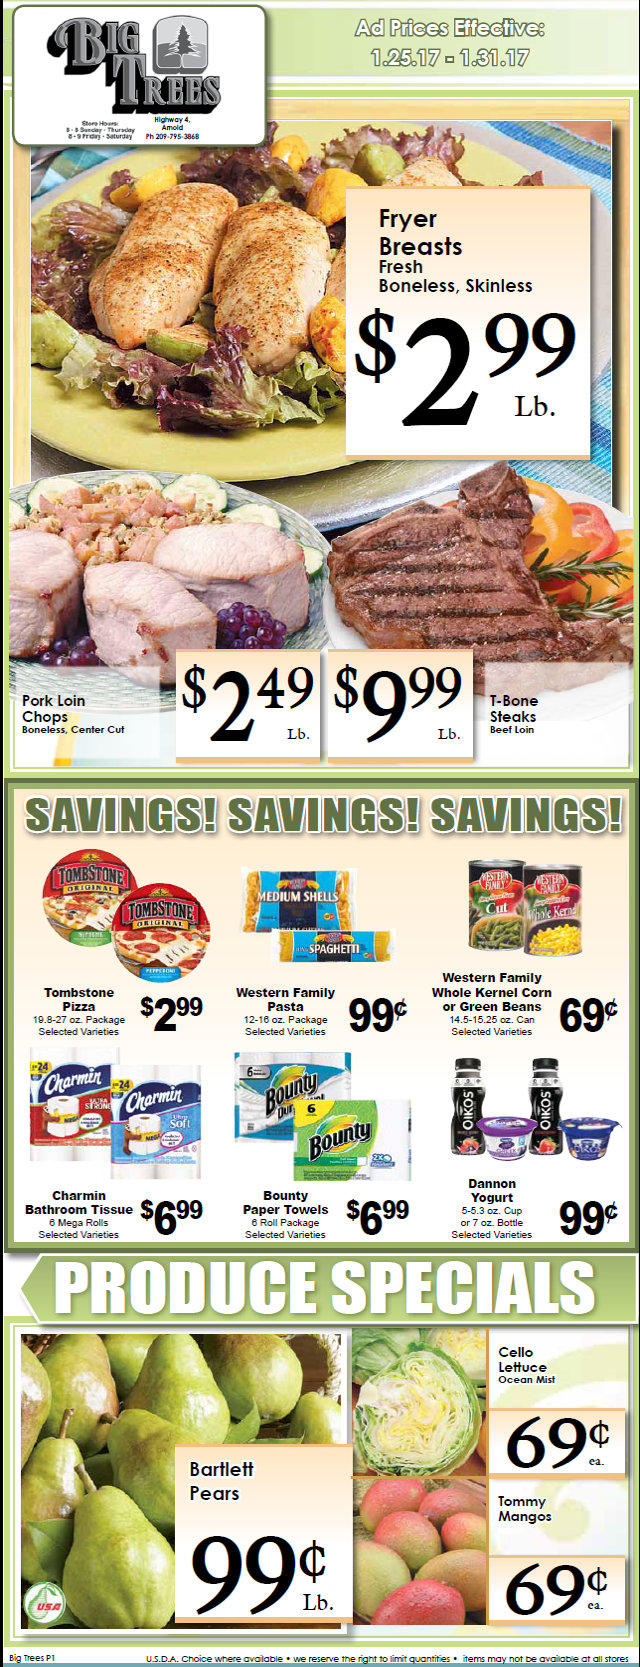 Big Trees Market Weekly Ad & Grocery Specials Through January 31st